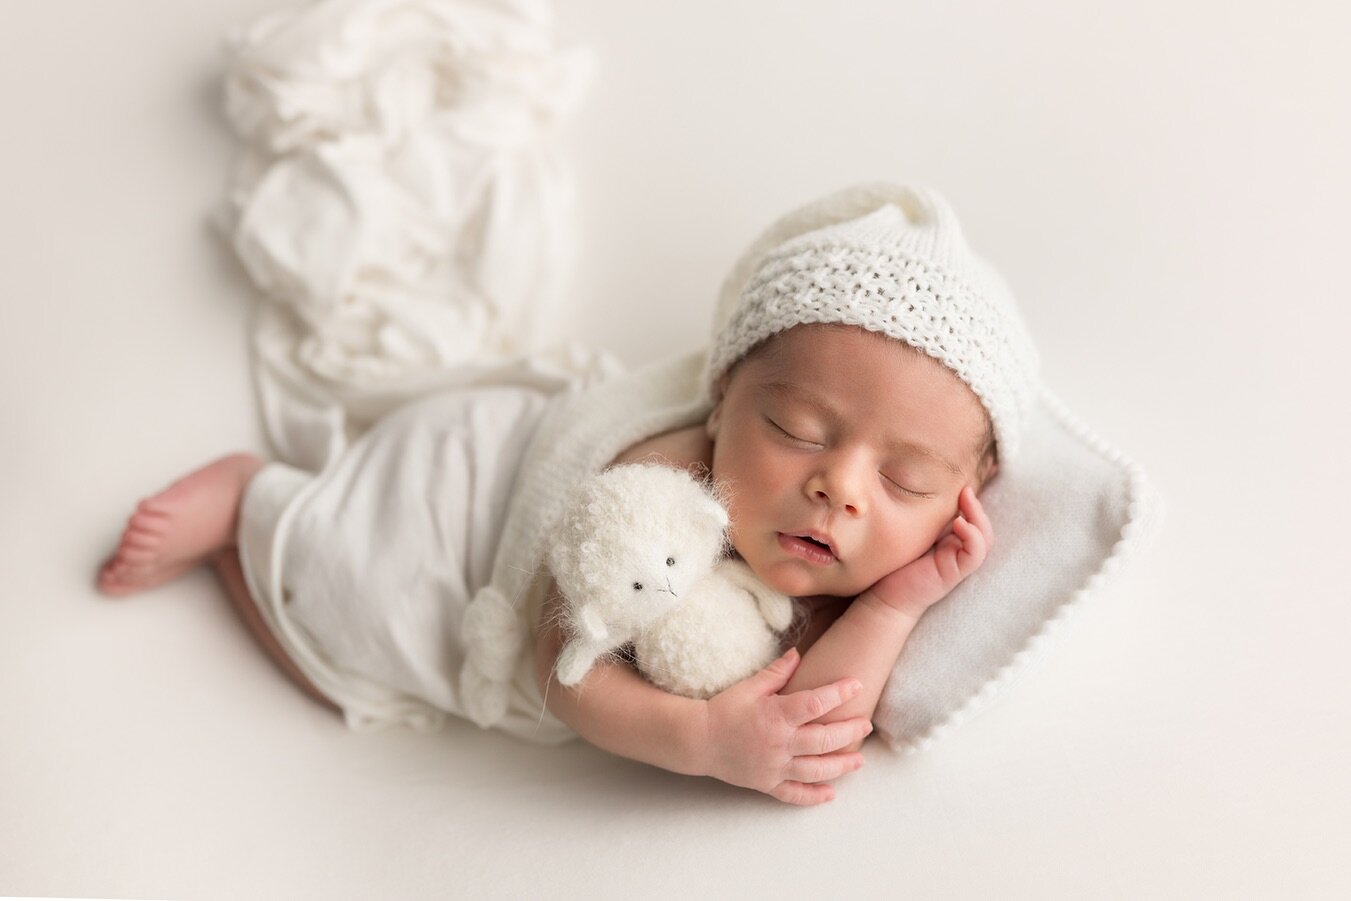 Just the cutest baby, sleeping peacefully.  For new parents this is one of their favorite moments to admire the perfection of every detail of their baby.
When are these photo sessions done?  Ideally around 10 days after birth. 
#newbornphotographer #